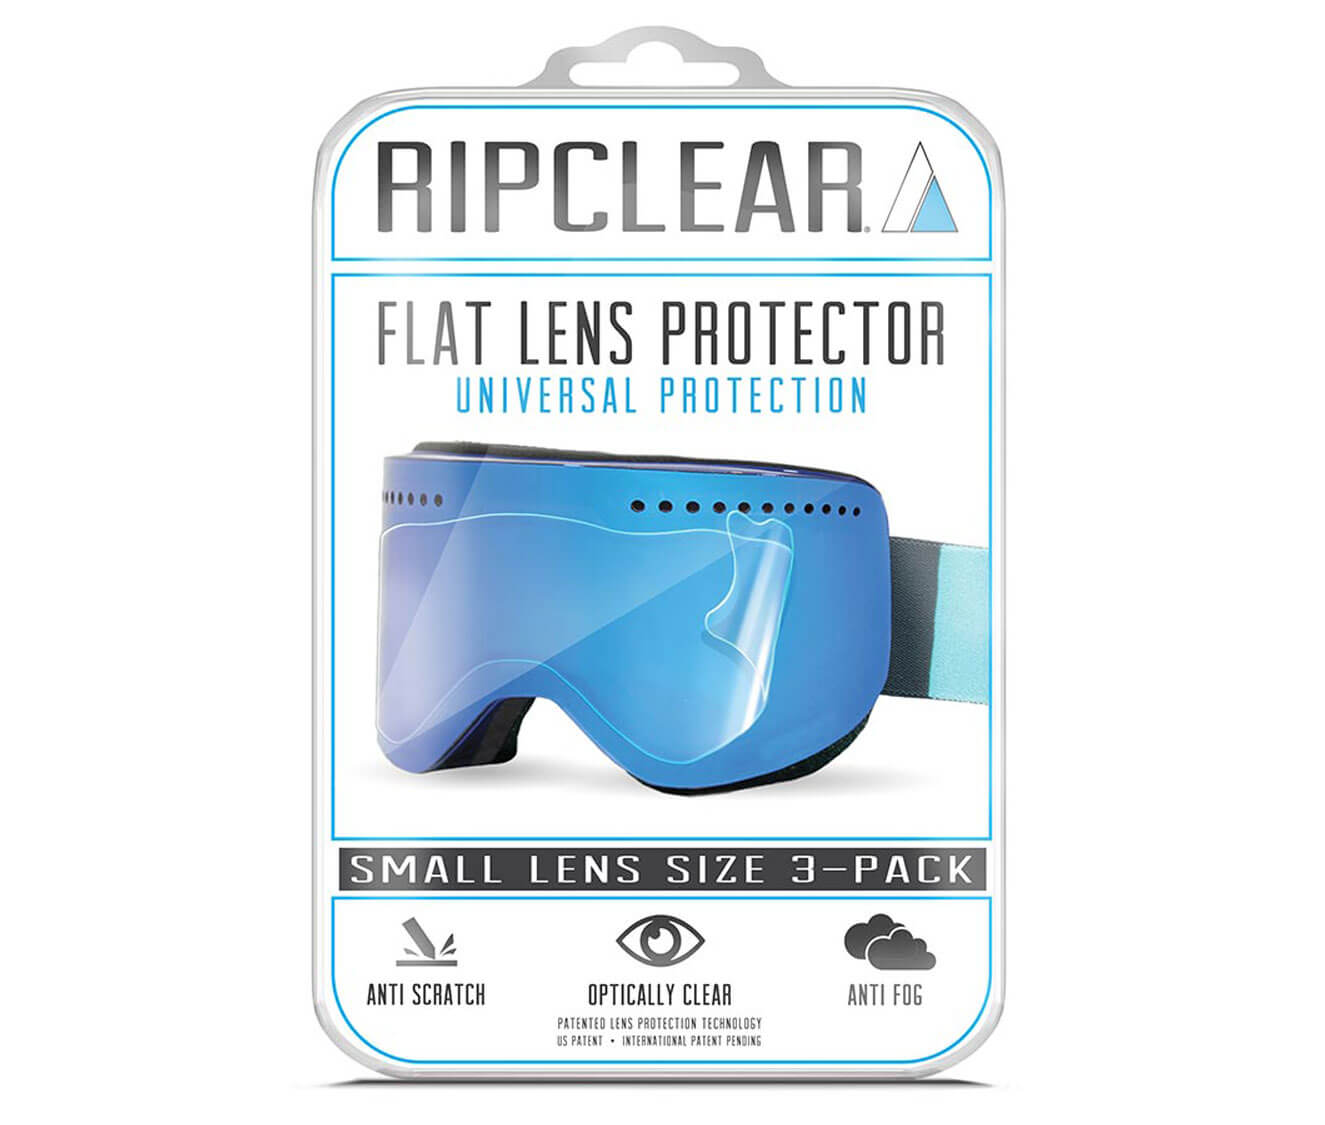 Ripclear Cylindrical Small Universal Snow Goggles Flat Lens Protector - 3 Pack